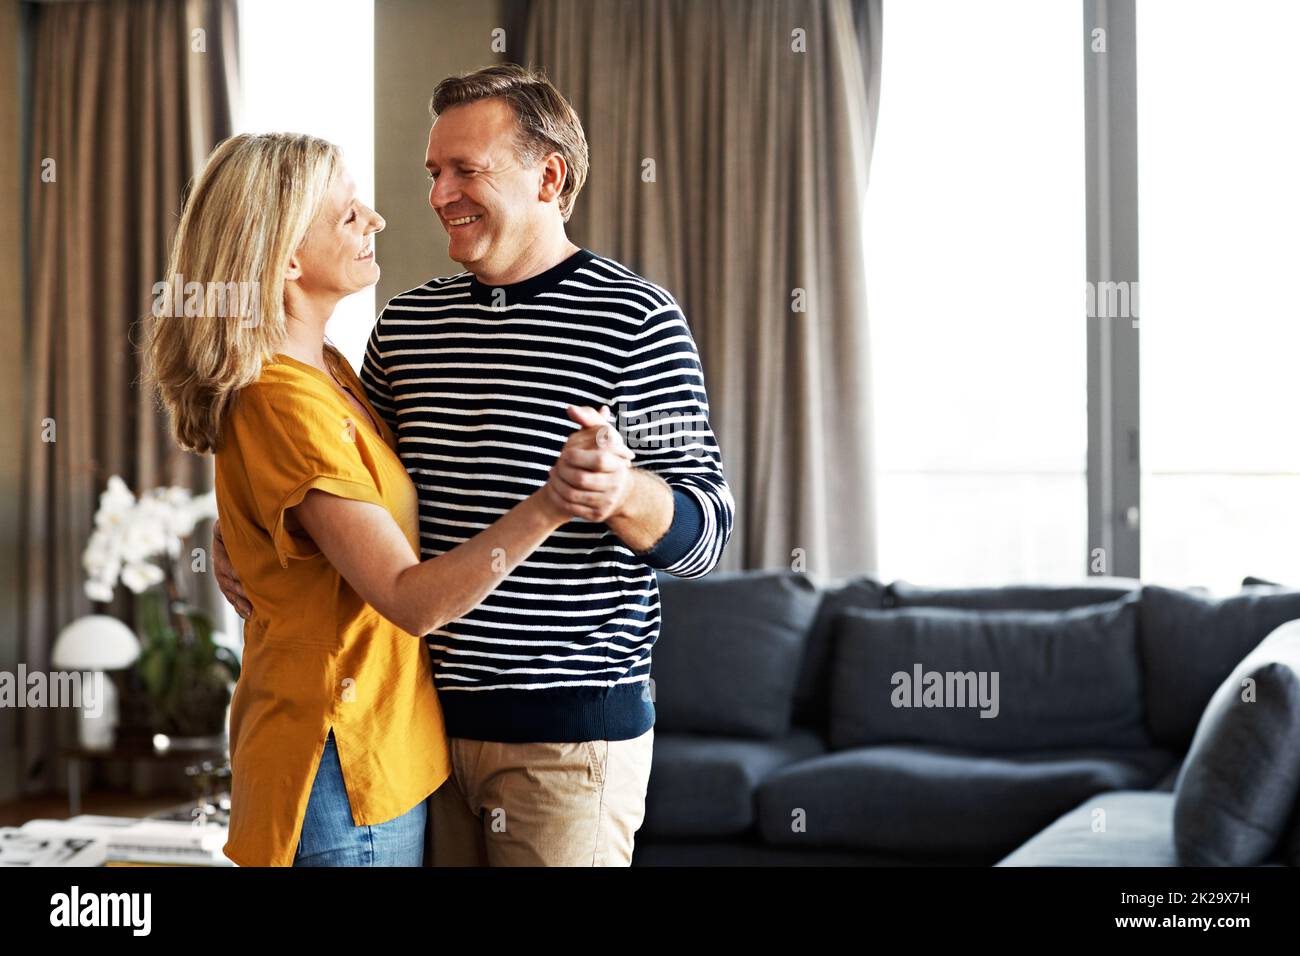 Dancing in the living room. Shot of an affectionate mature couple dancing in their living room. Stock Photo